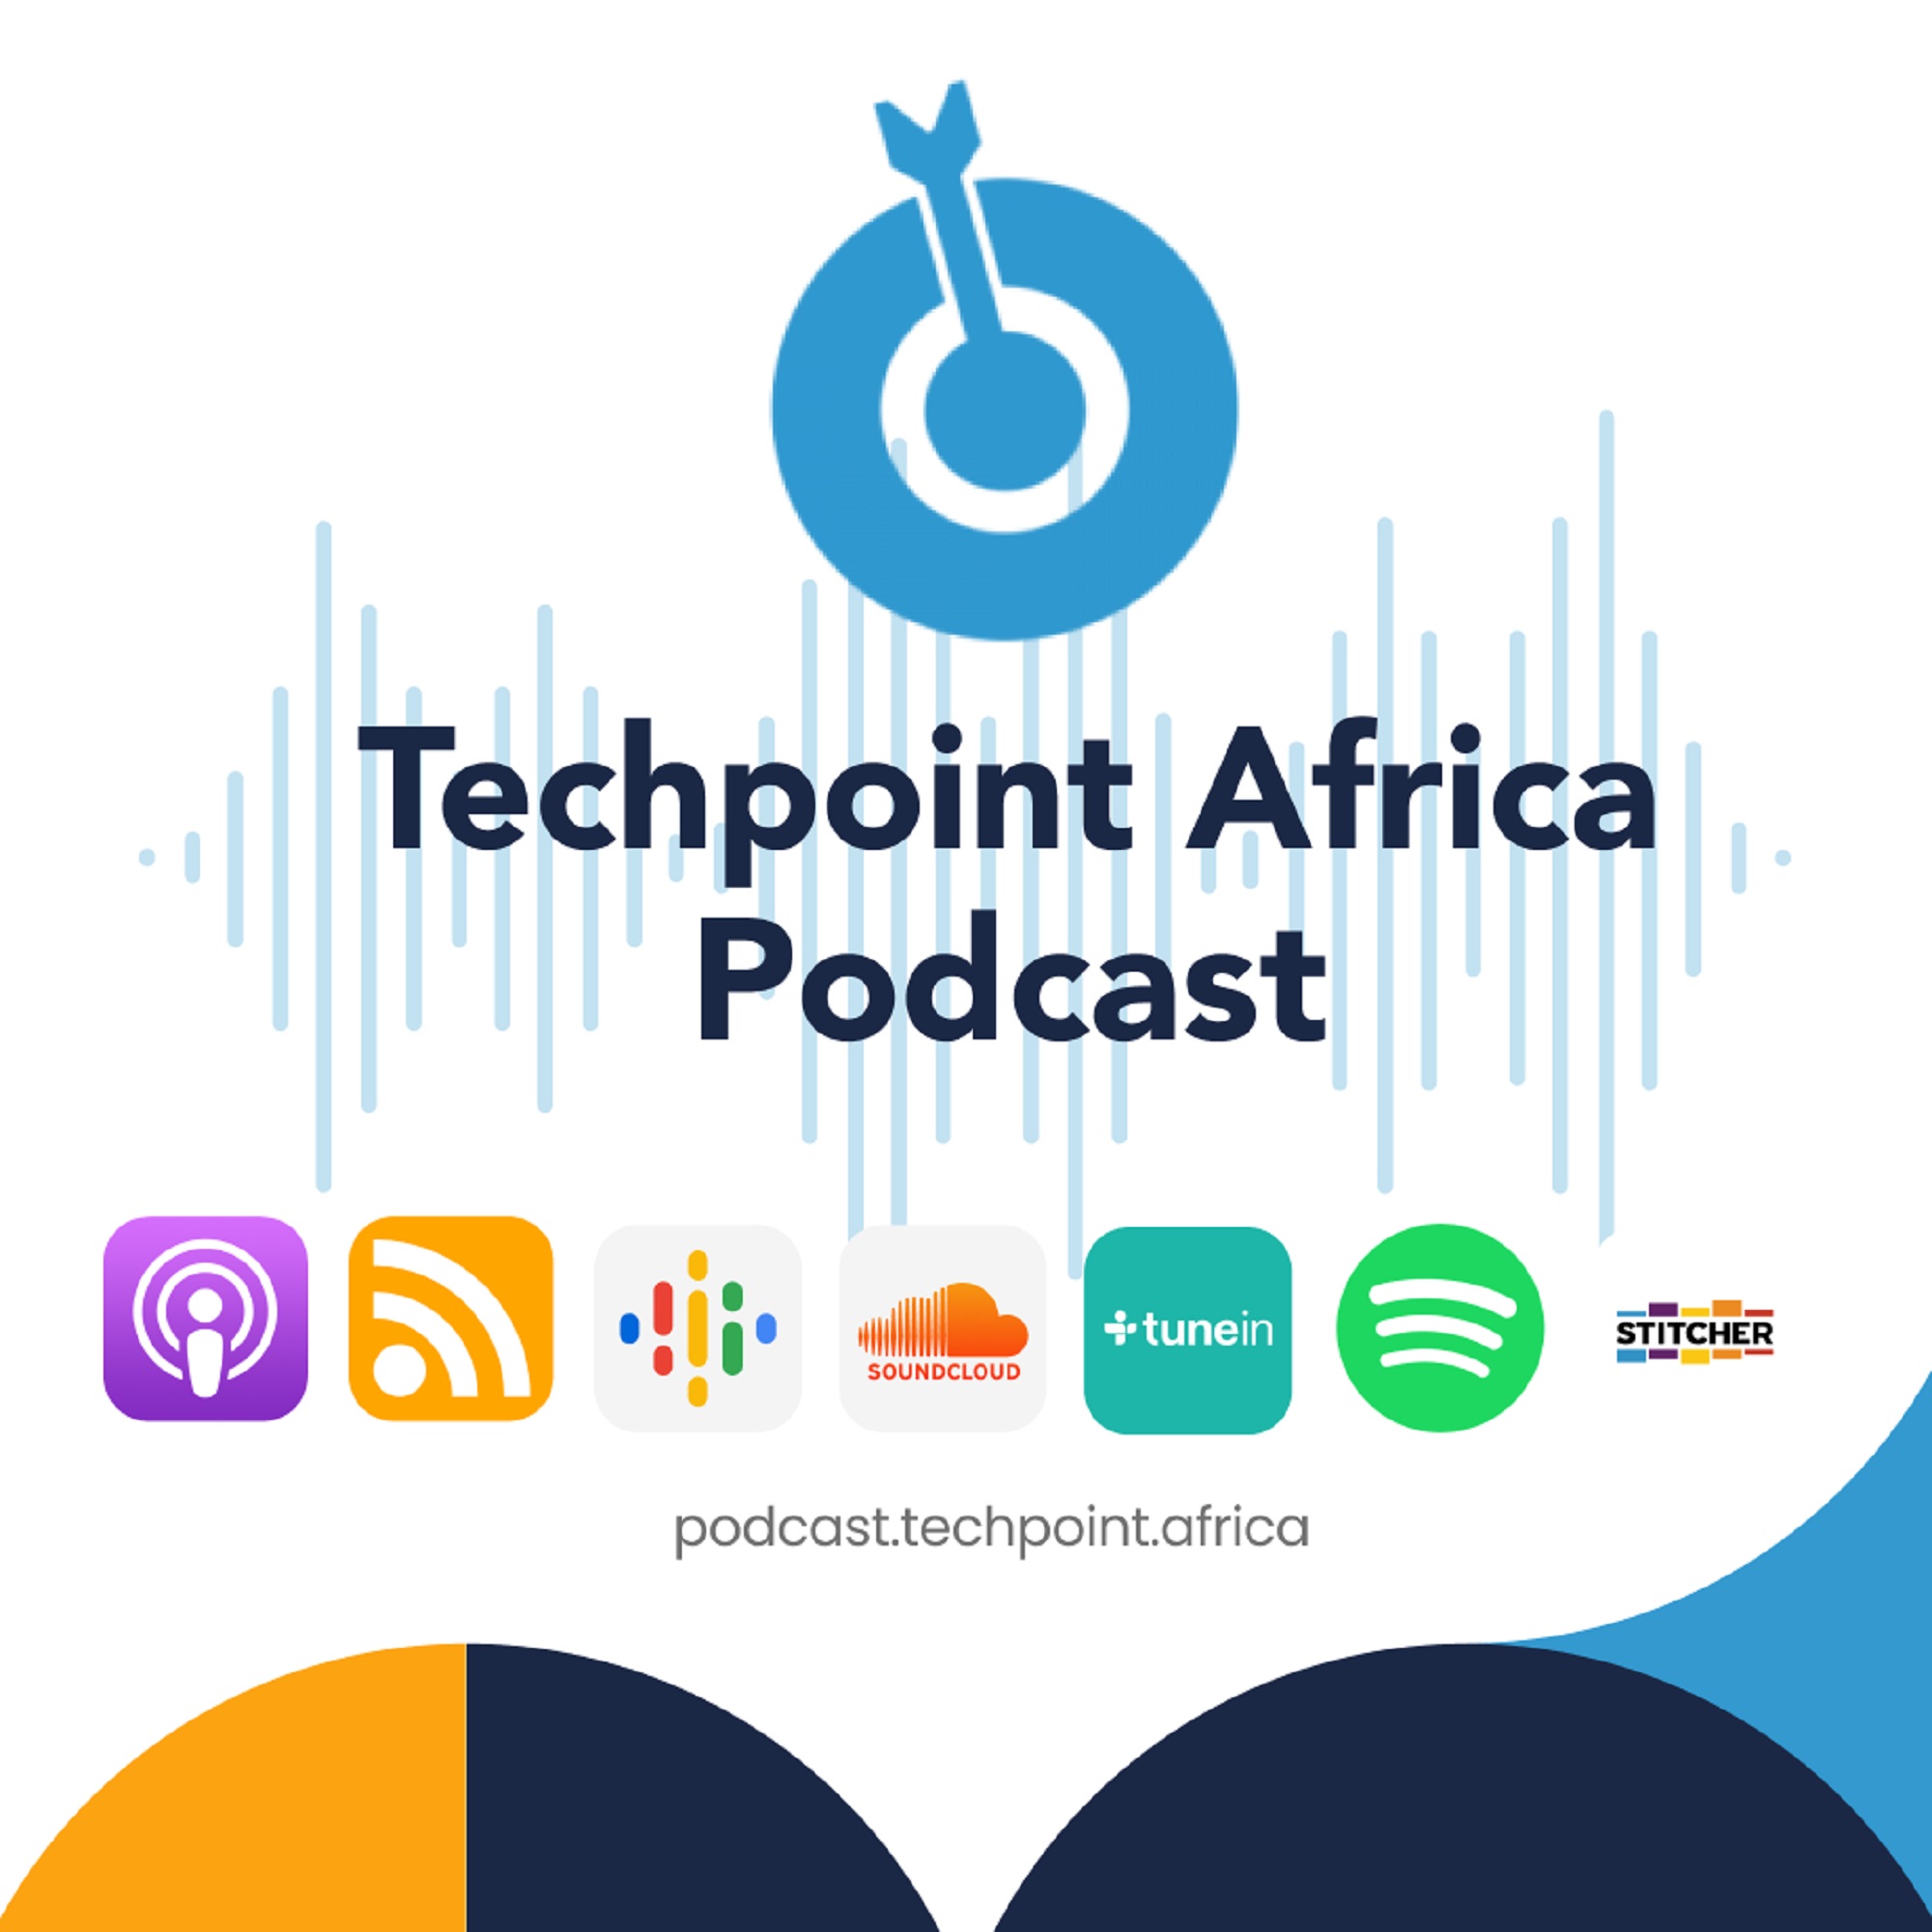 Introducing Built in Africa, a new podcast by Techpoint Africa